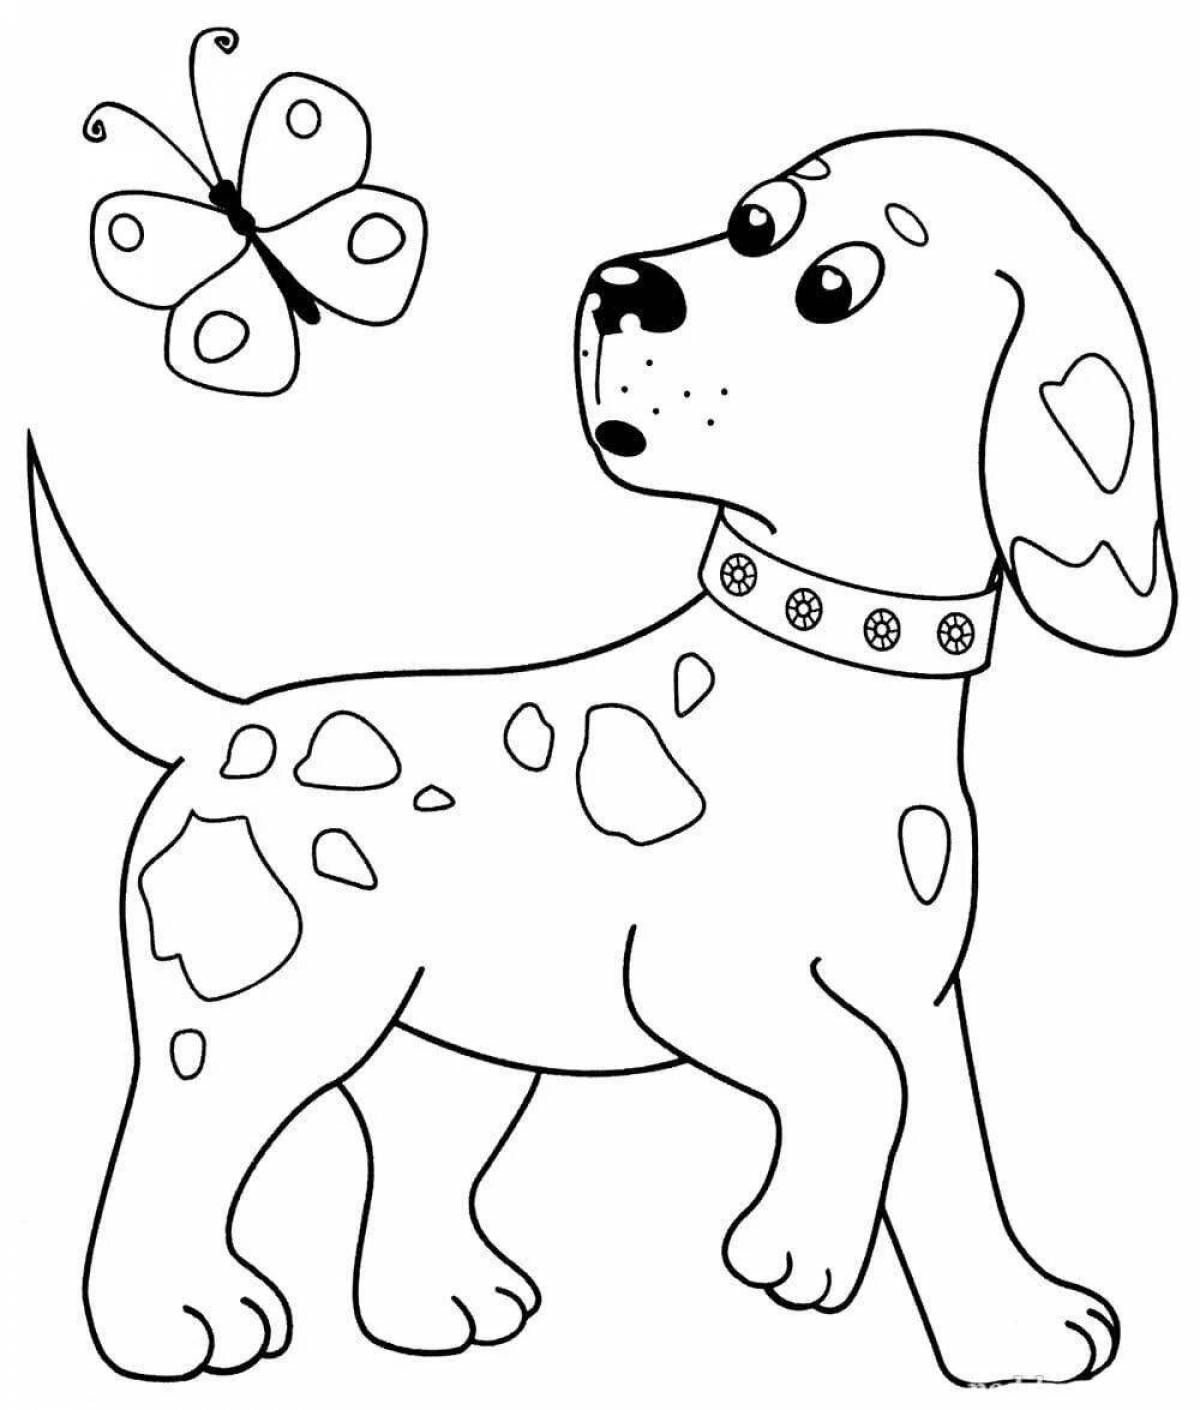 Snuggly coloring page pets dog